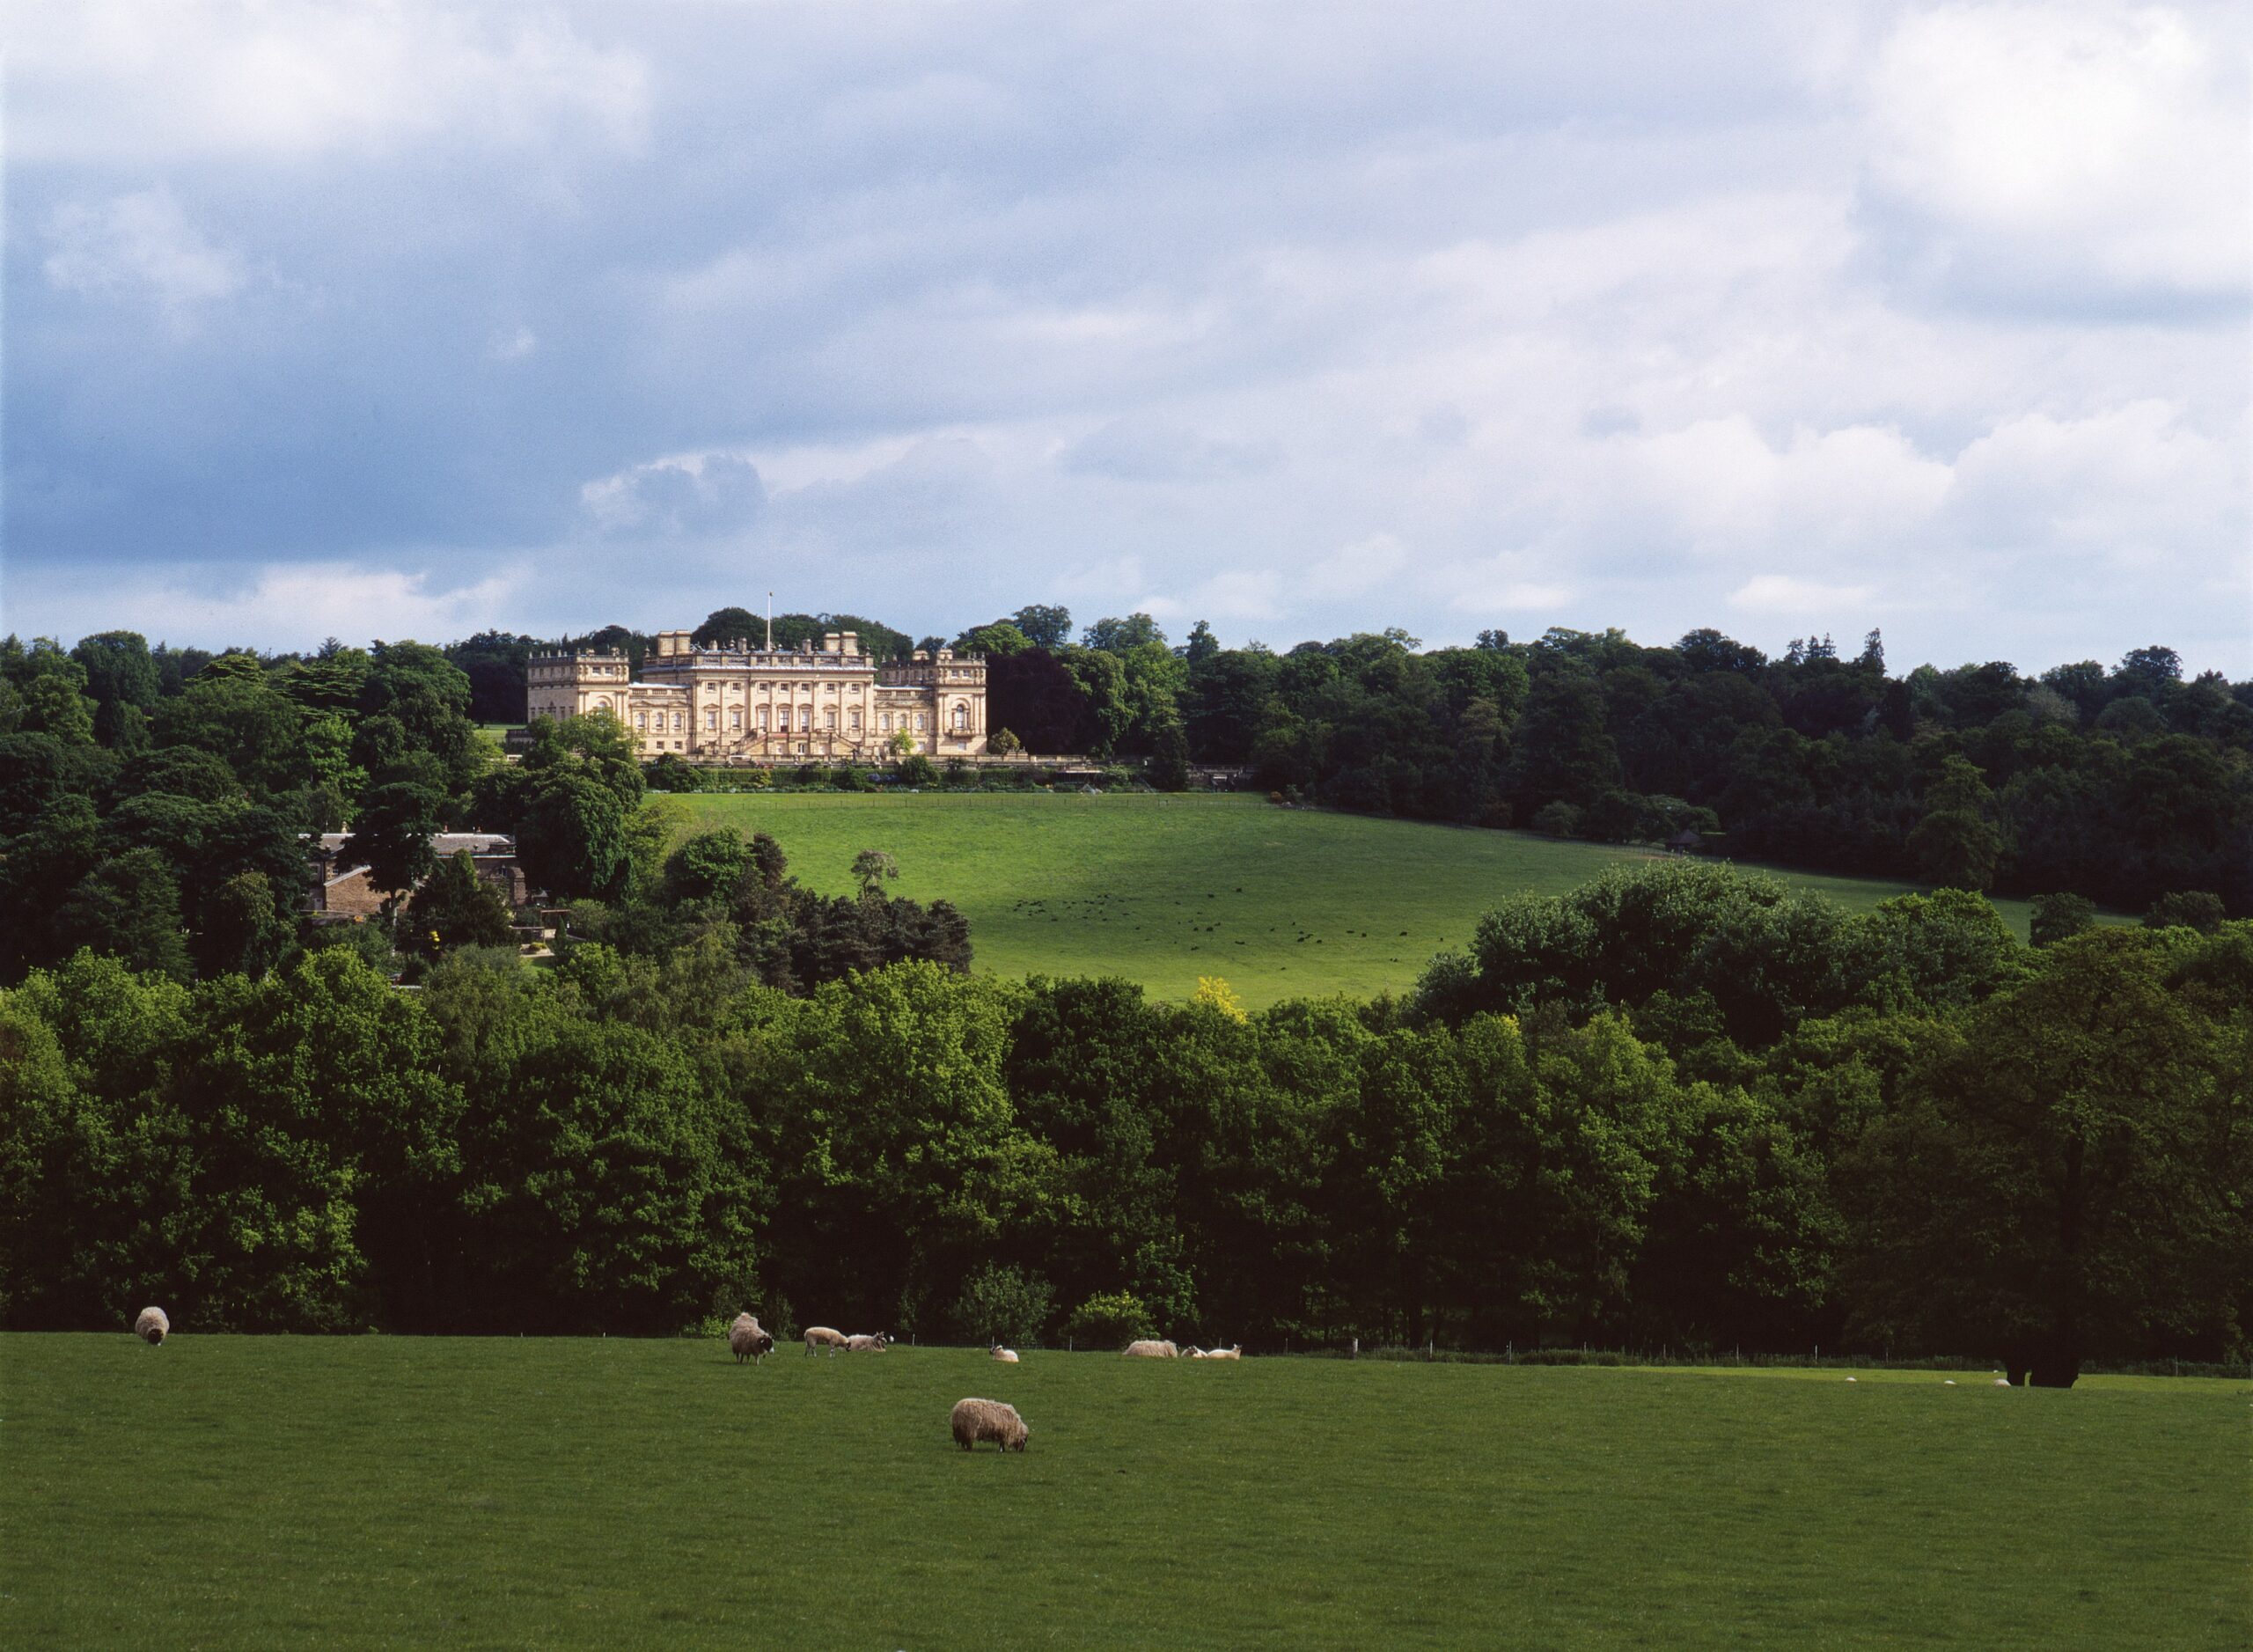 Views of the landscape at Harewood House